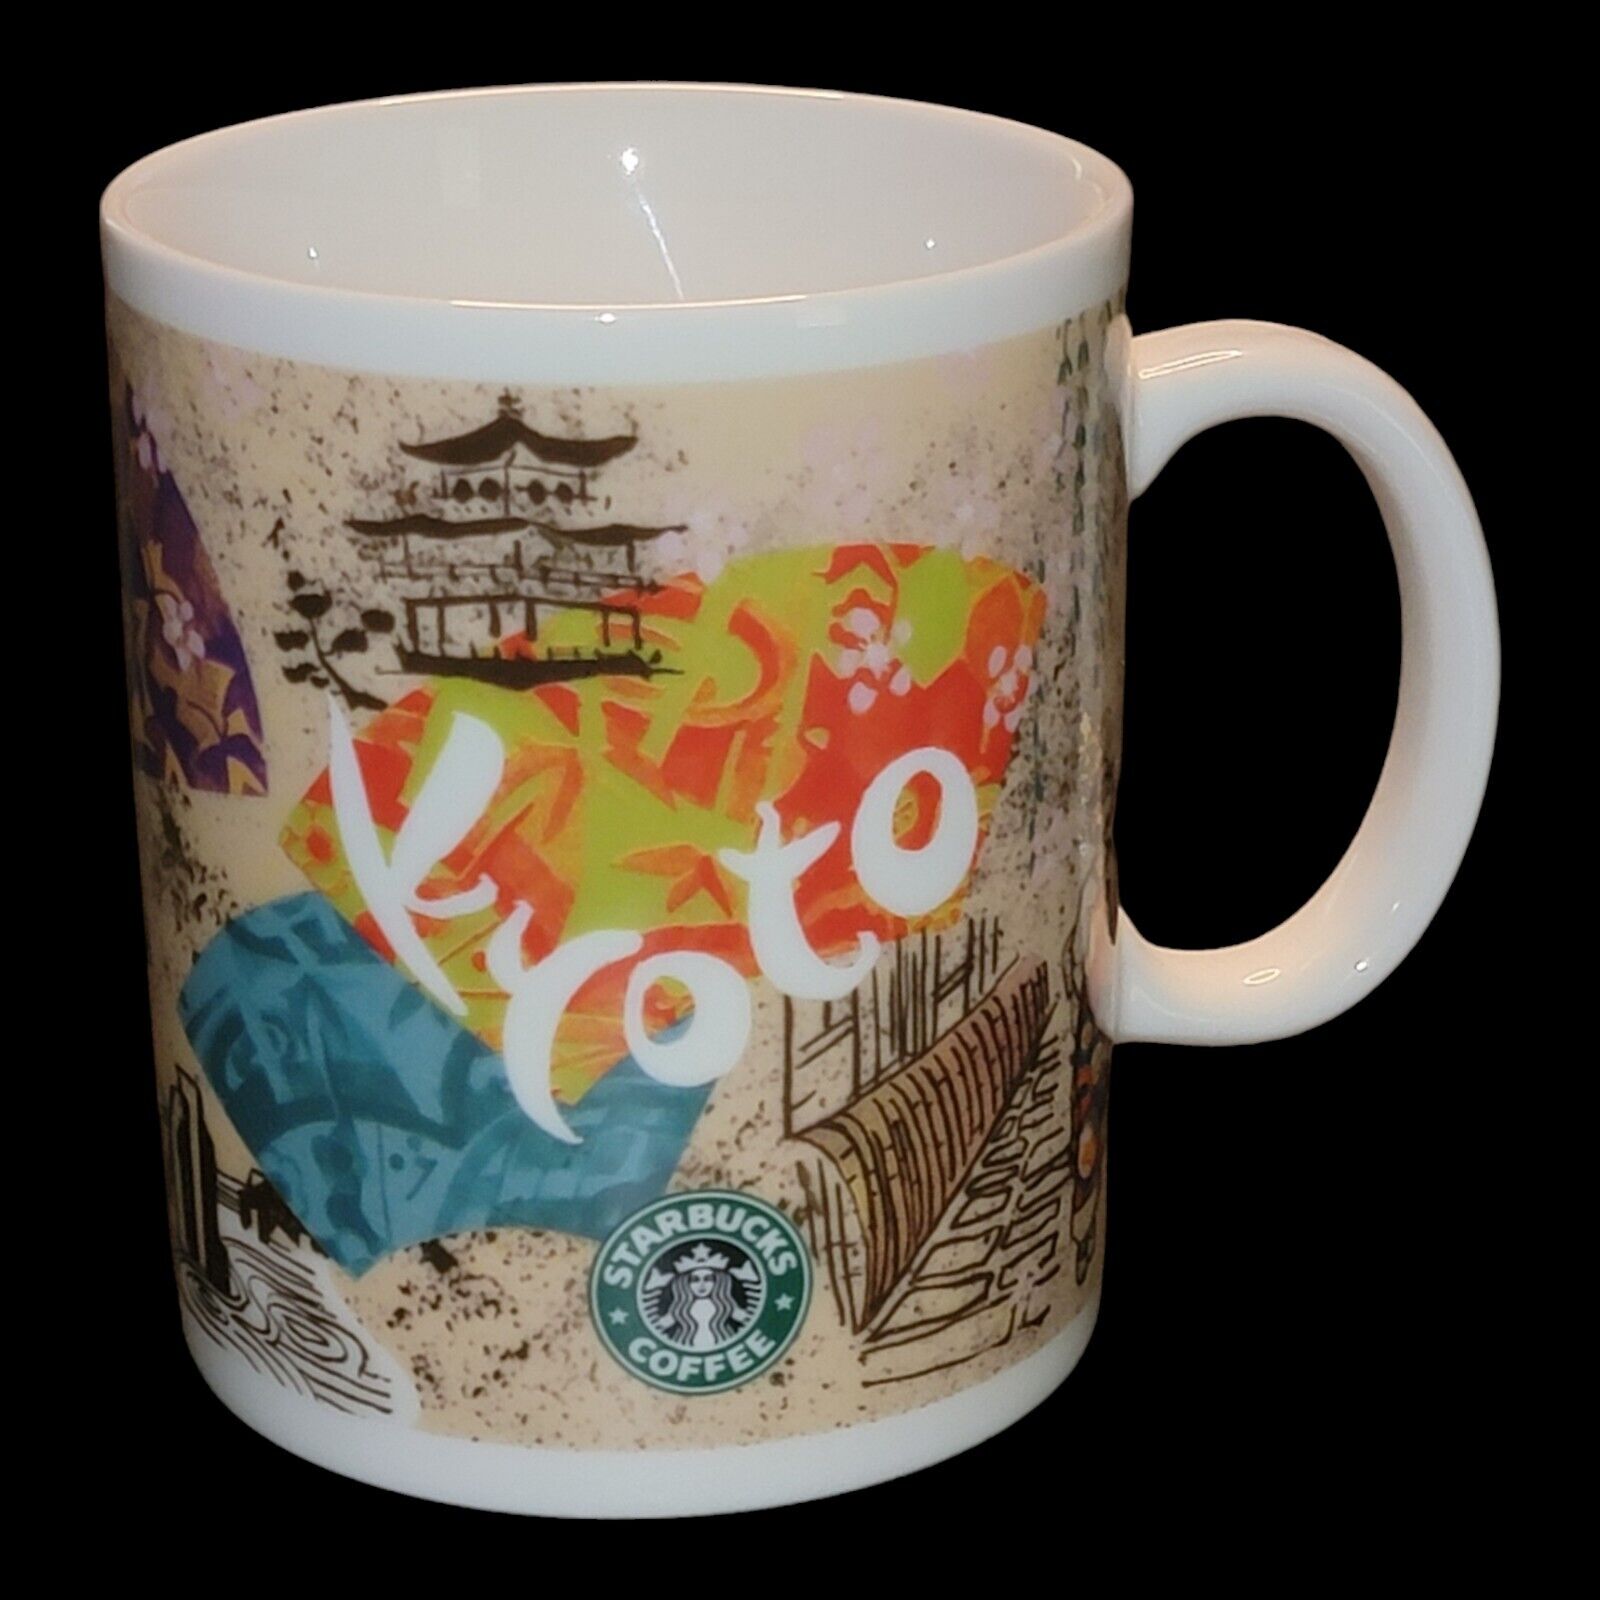 Starbucks Coffee Mug Kyoto Japan 2014 Cup Ive Been There Cherry Blossoms 12oz